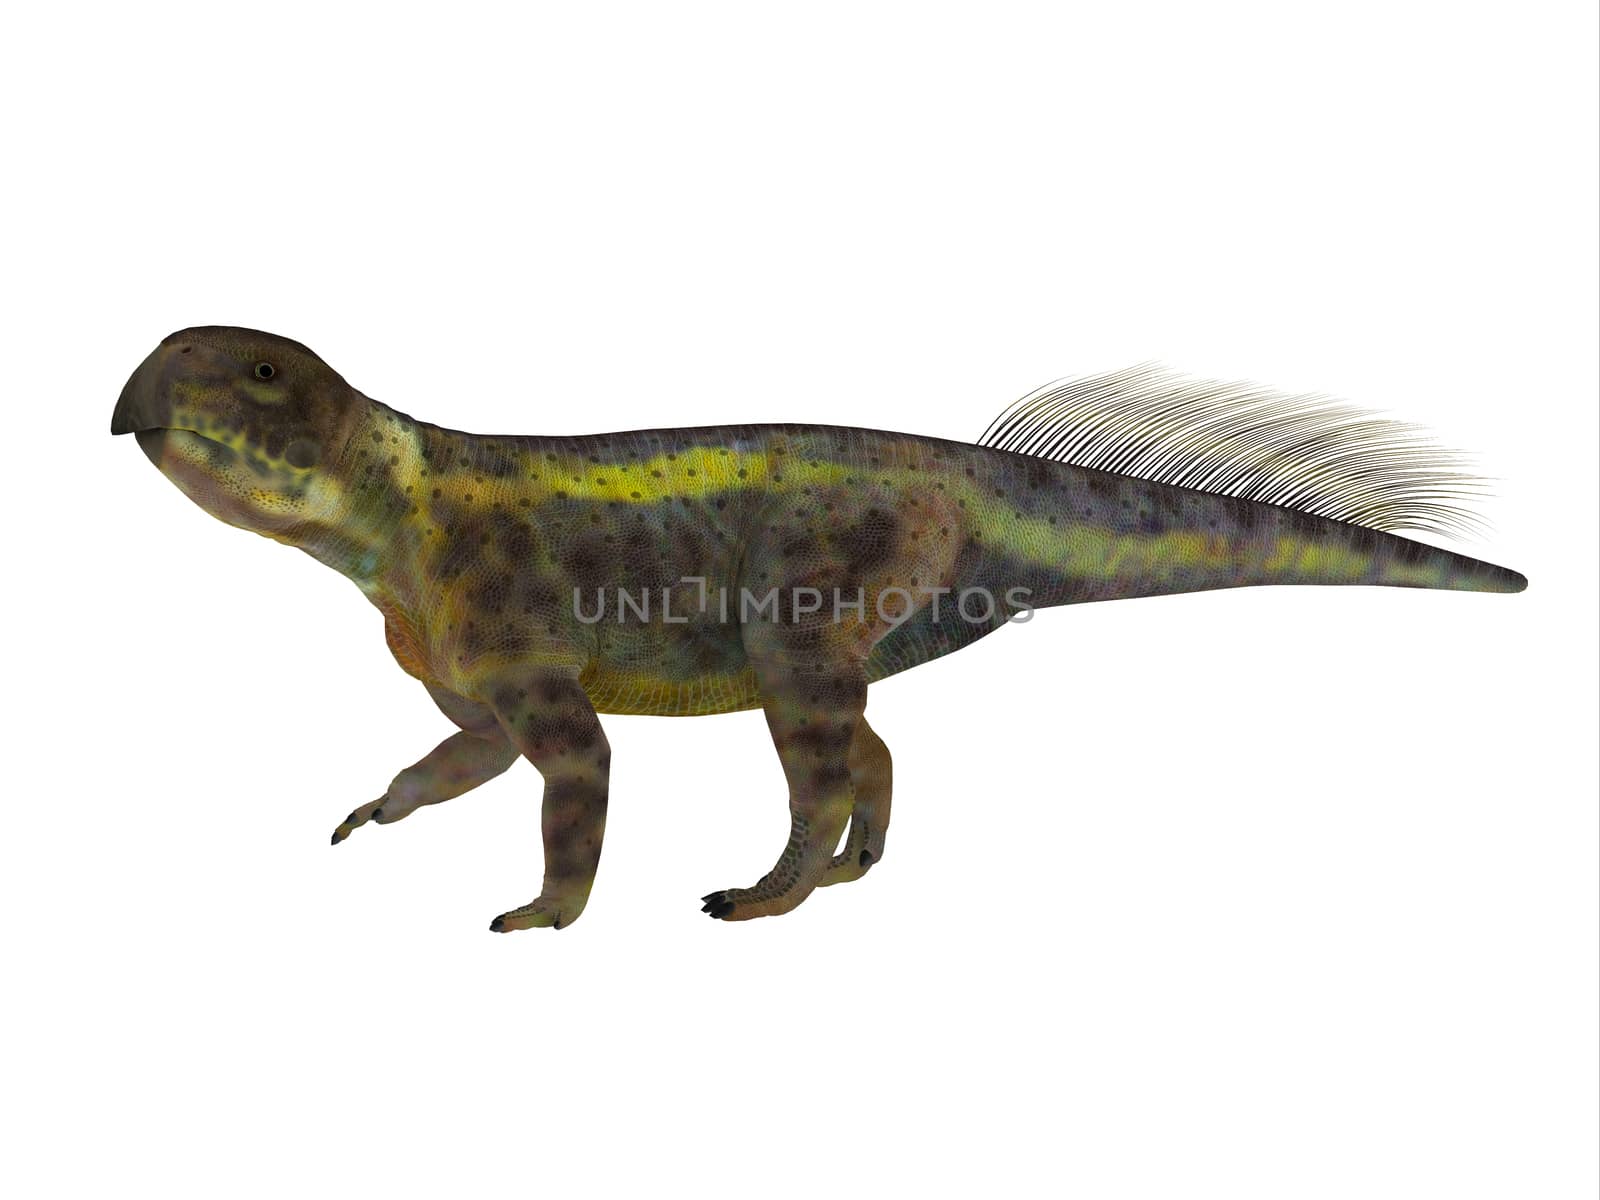 Psittacosaurus was a Ceratopsian herbivorous dinosaur that lived in Asia in the Cretaceous Period.